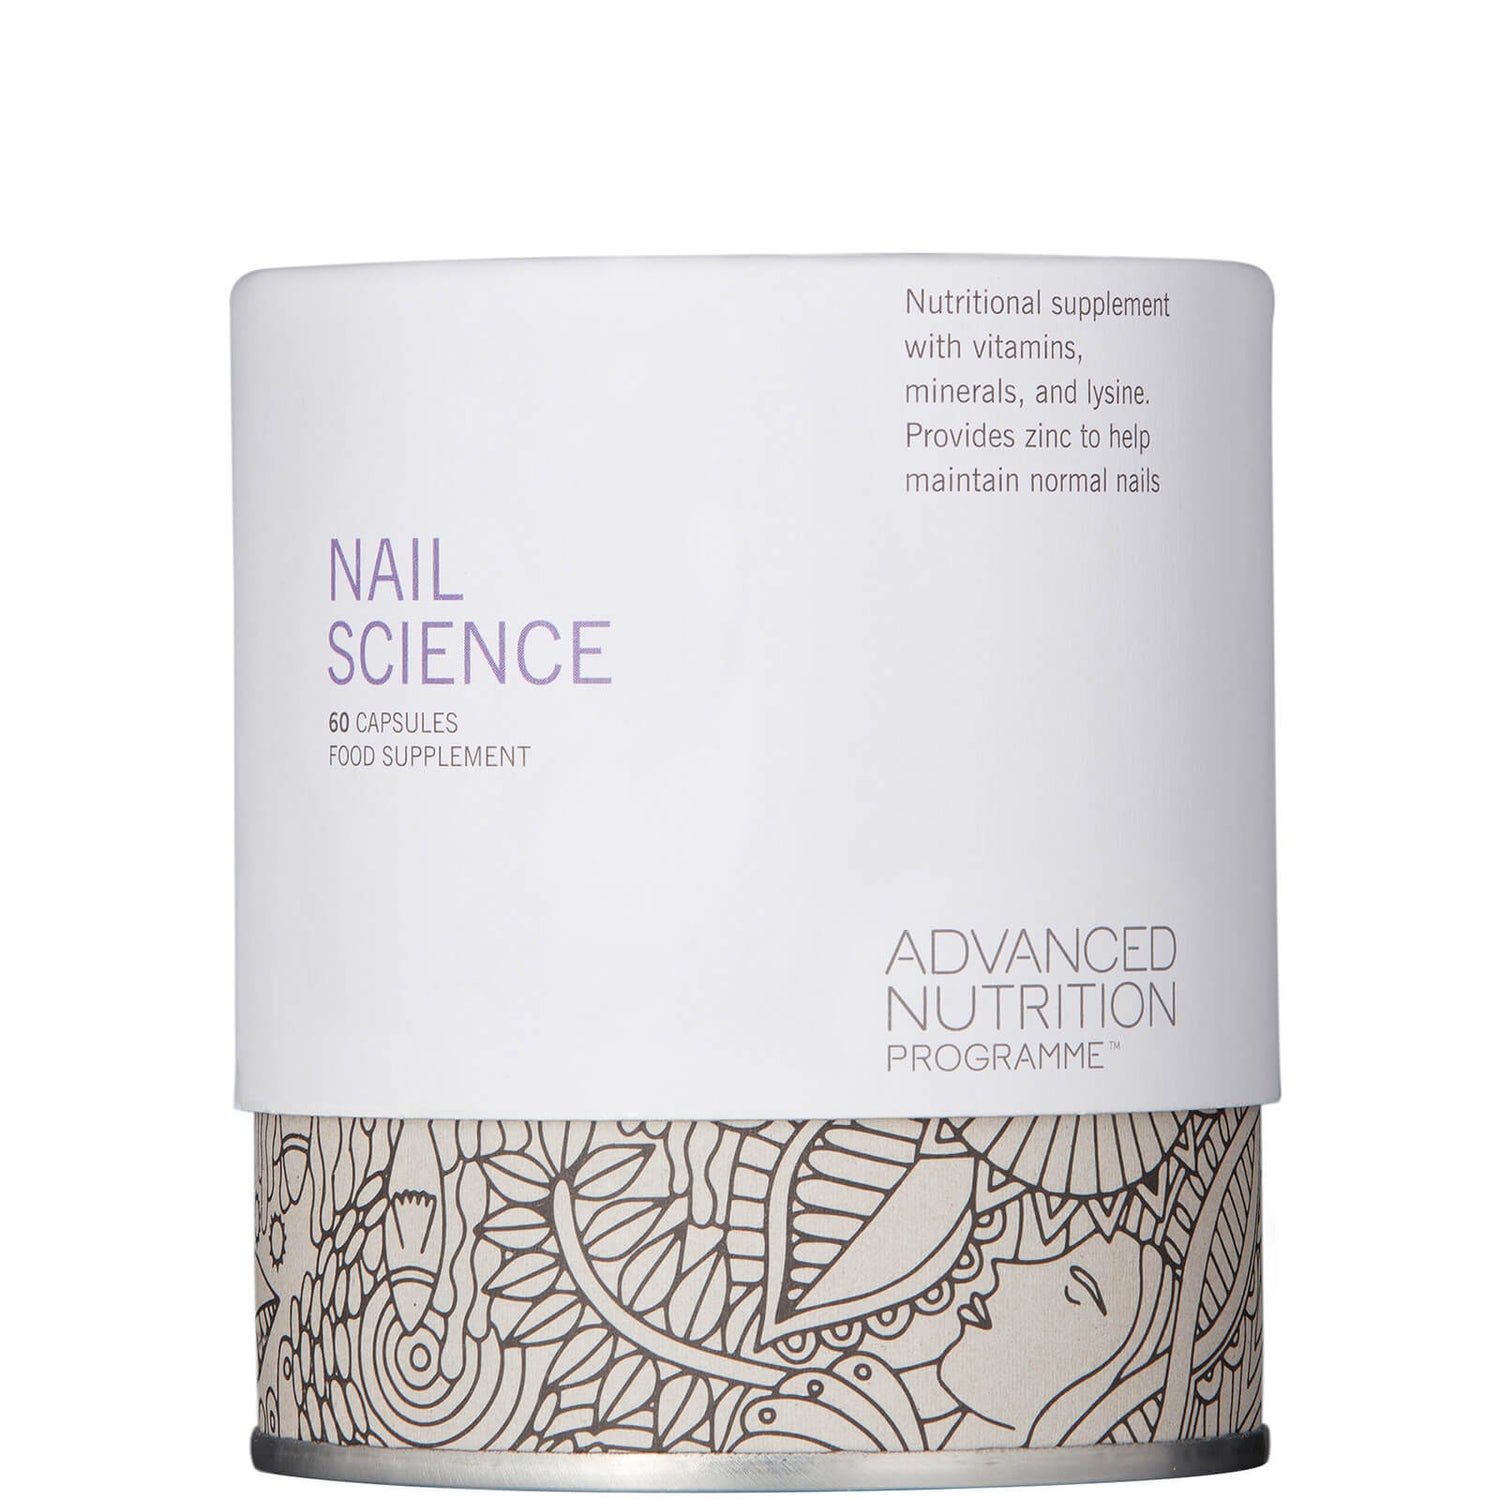 Advanced Nutrition Programme™ Nail Science - 60 Capsules